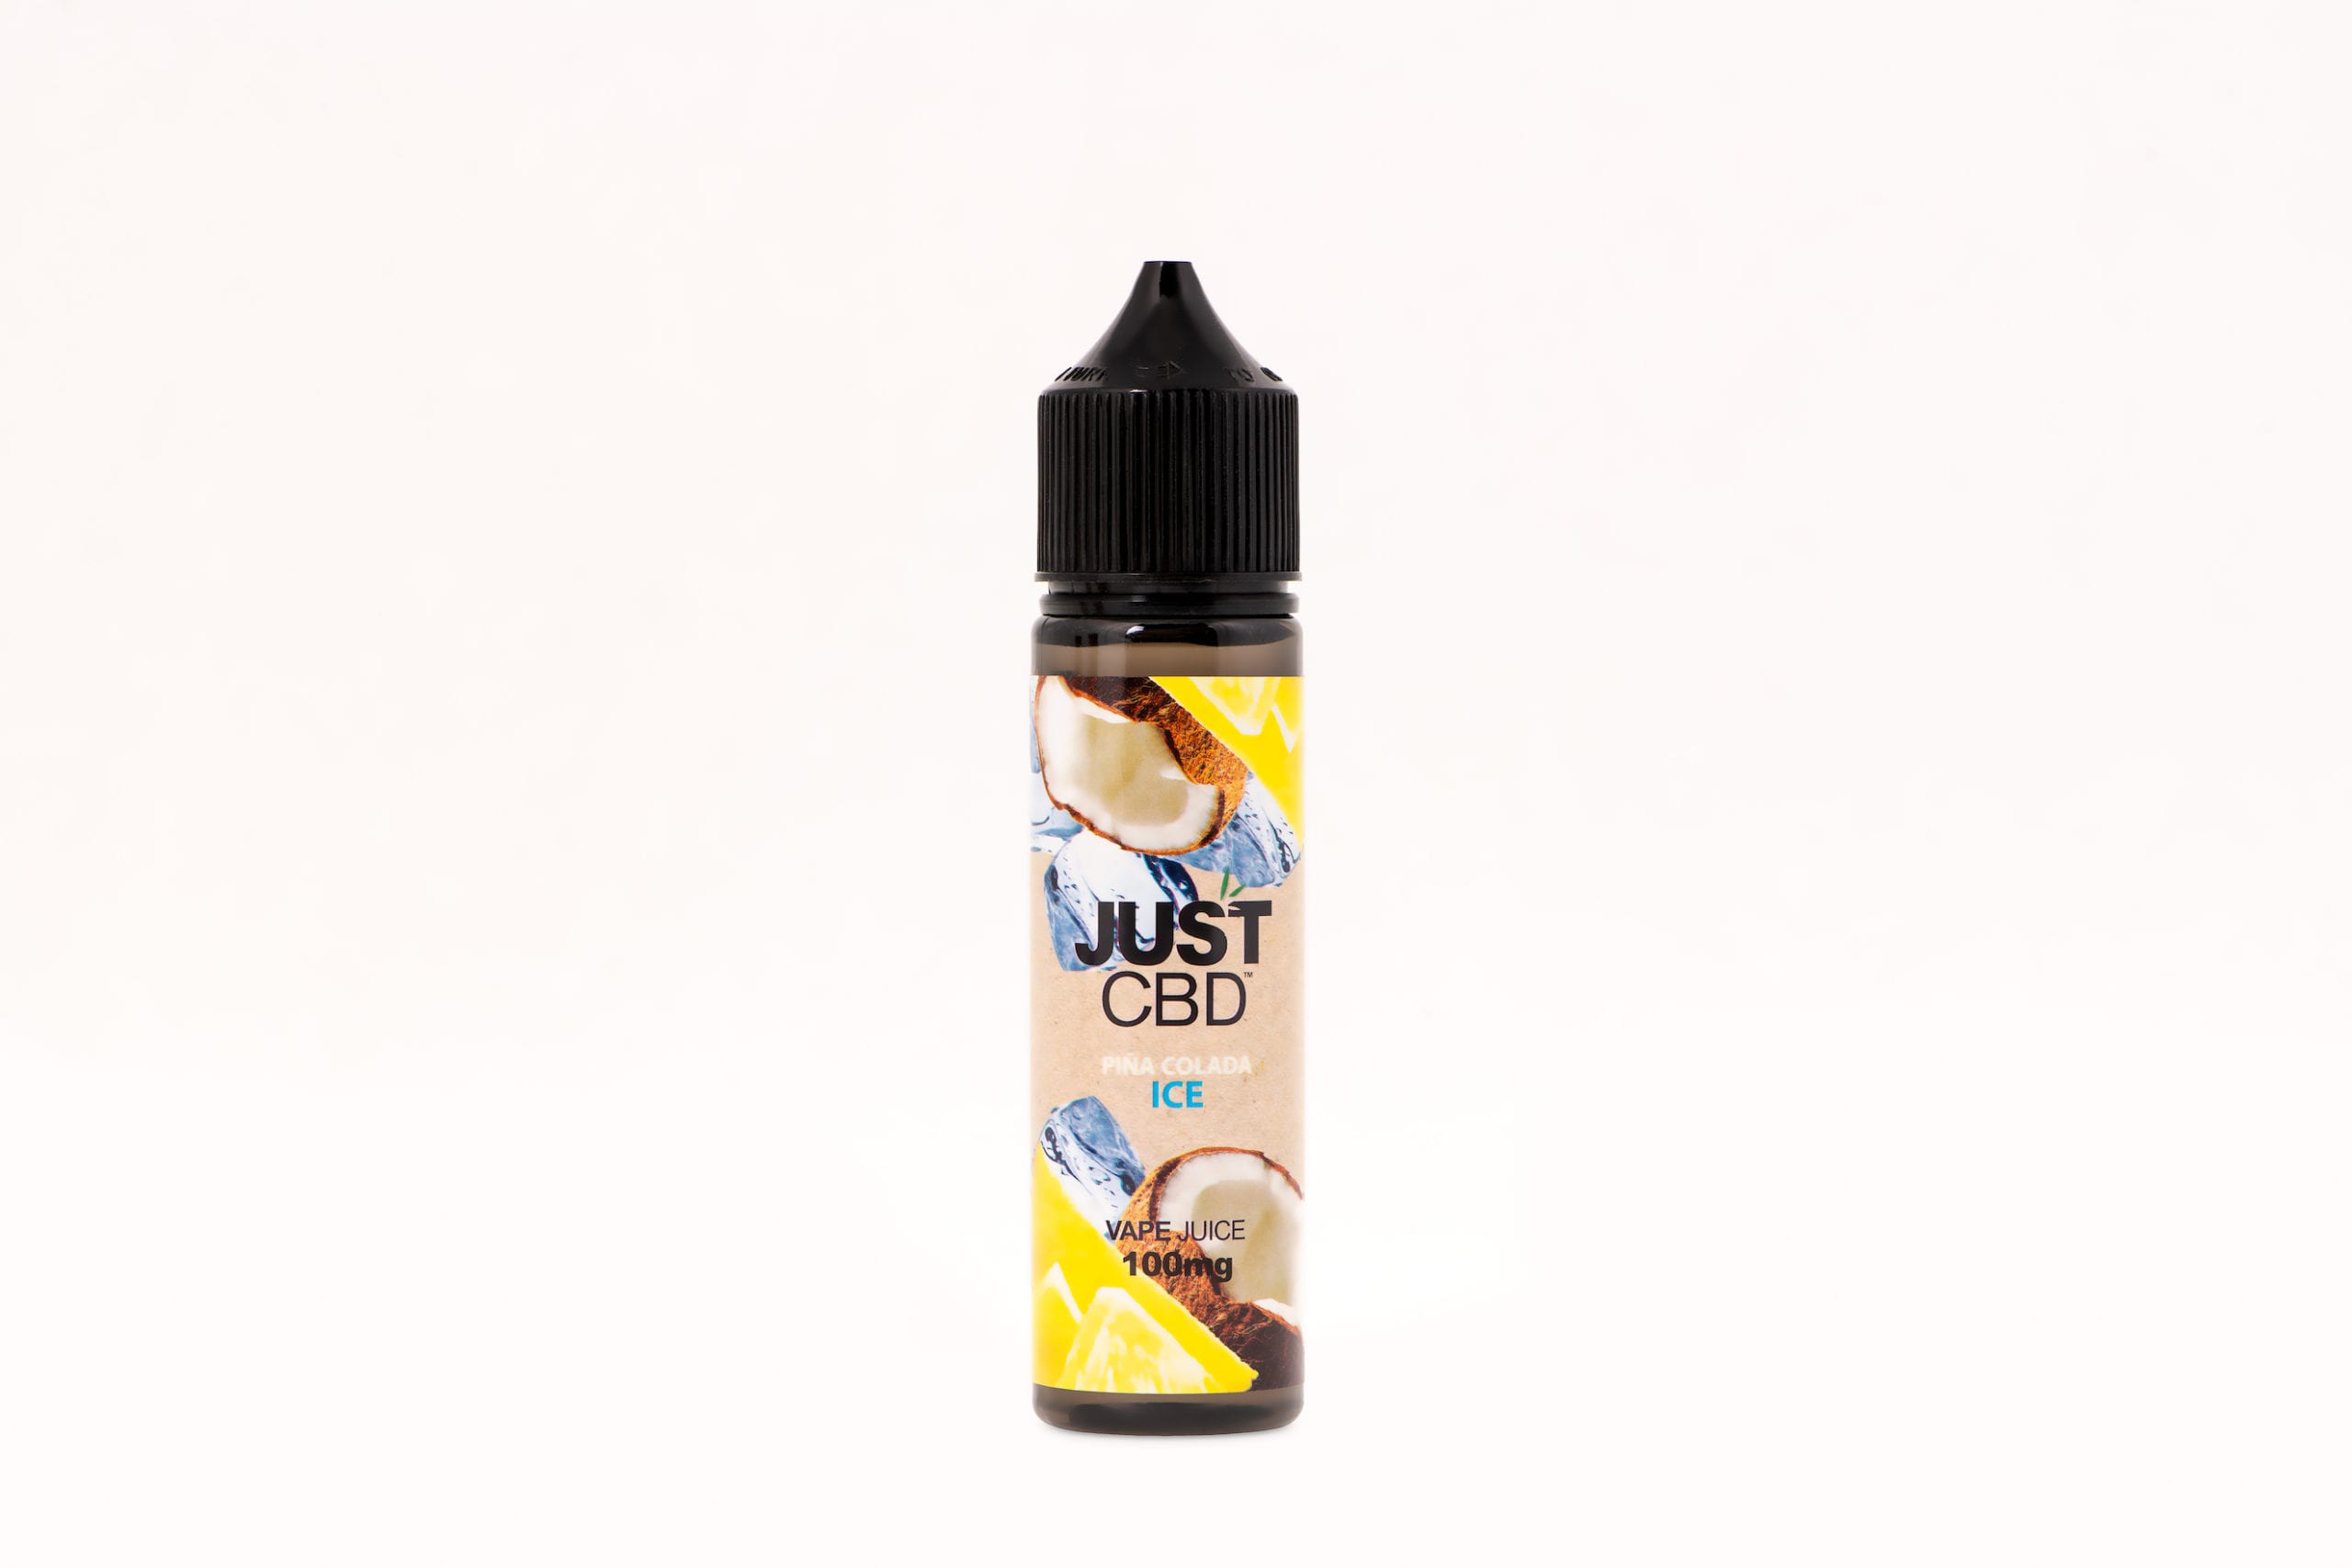 JustCBD Product Photography and Just CBD Products Pina Colada ICE vape juice container on display